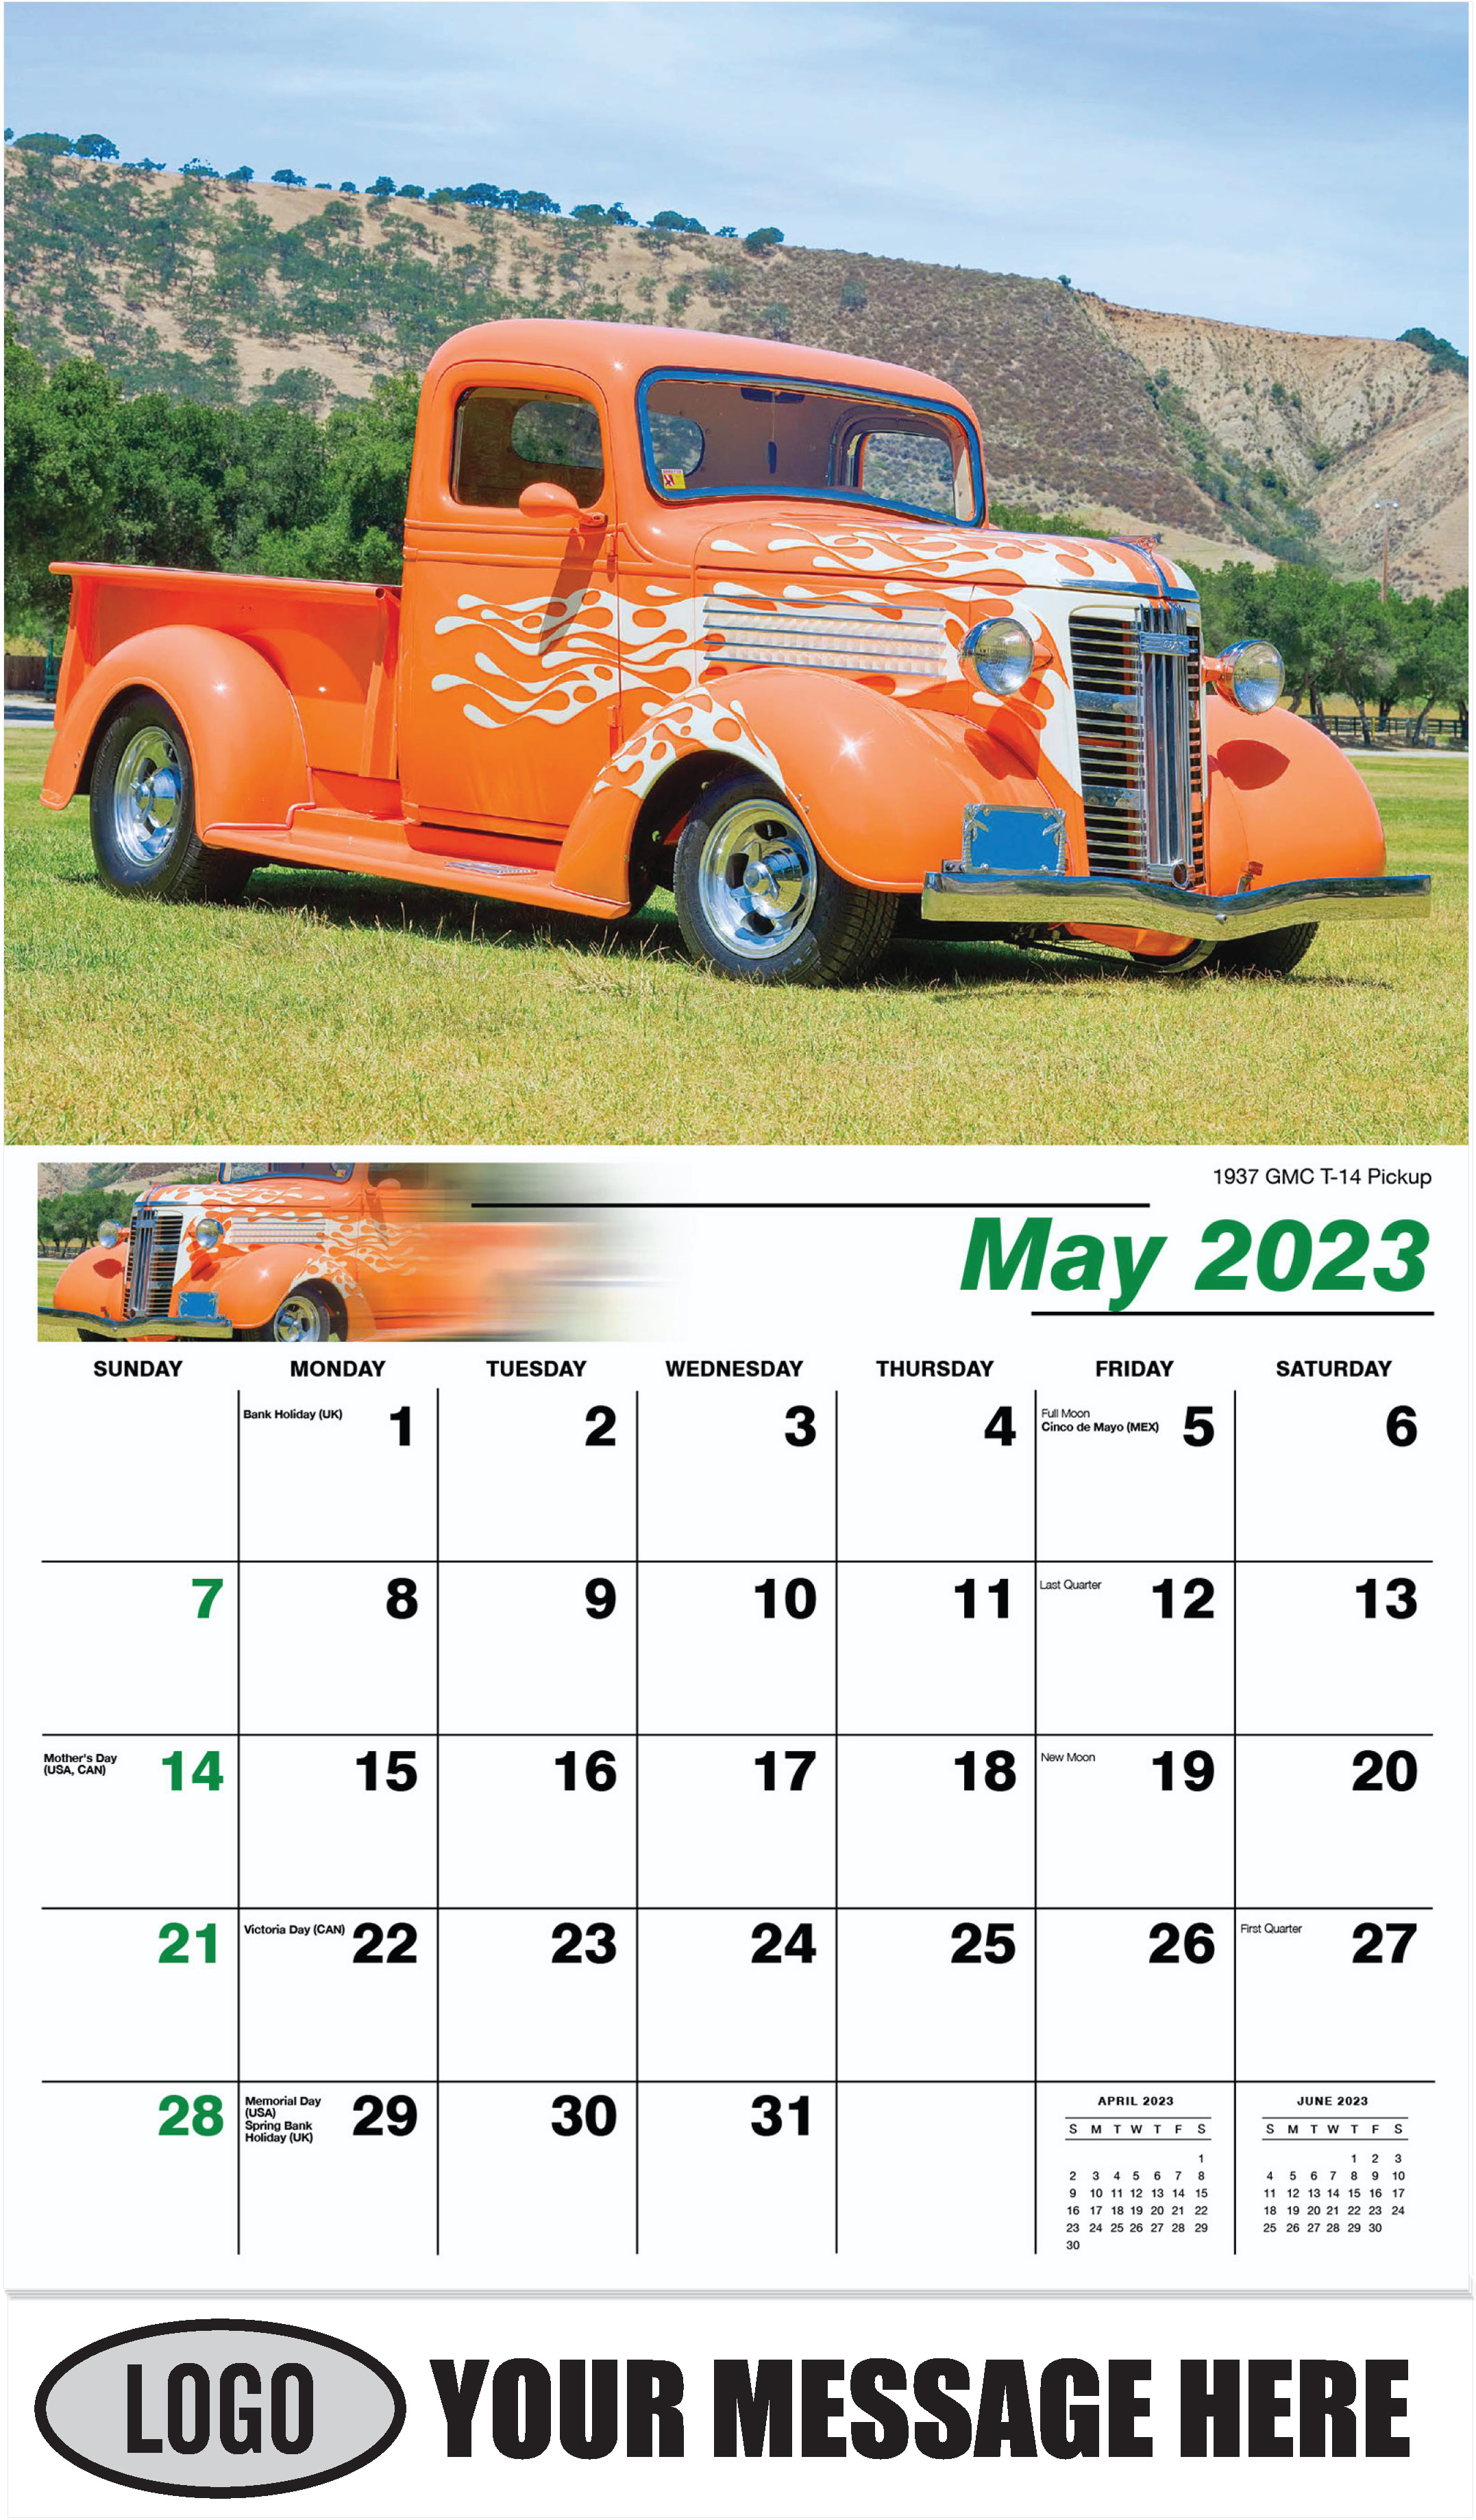 1937 GMC Pickup Truck - May - Pumped Up Pickups 2023 Promotional Calendar